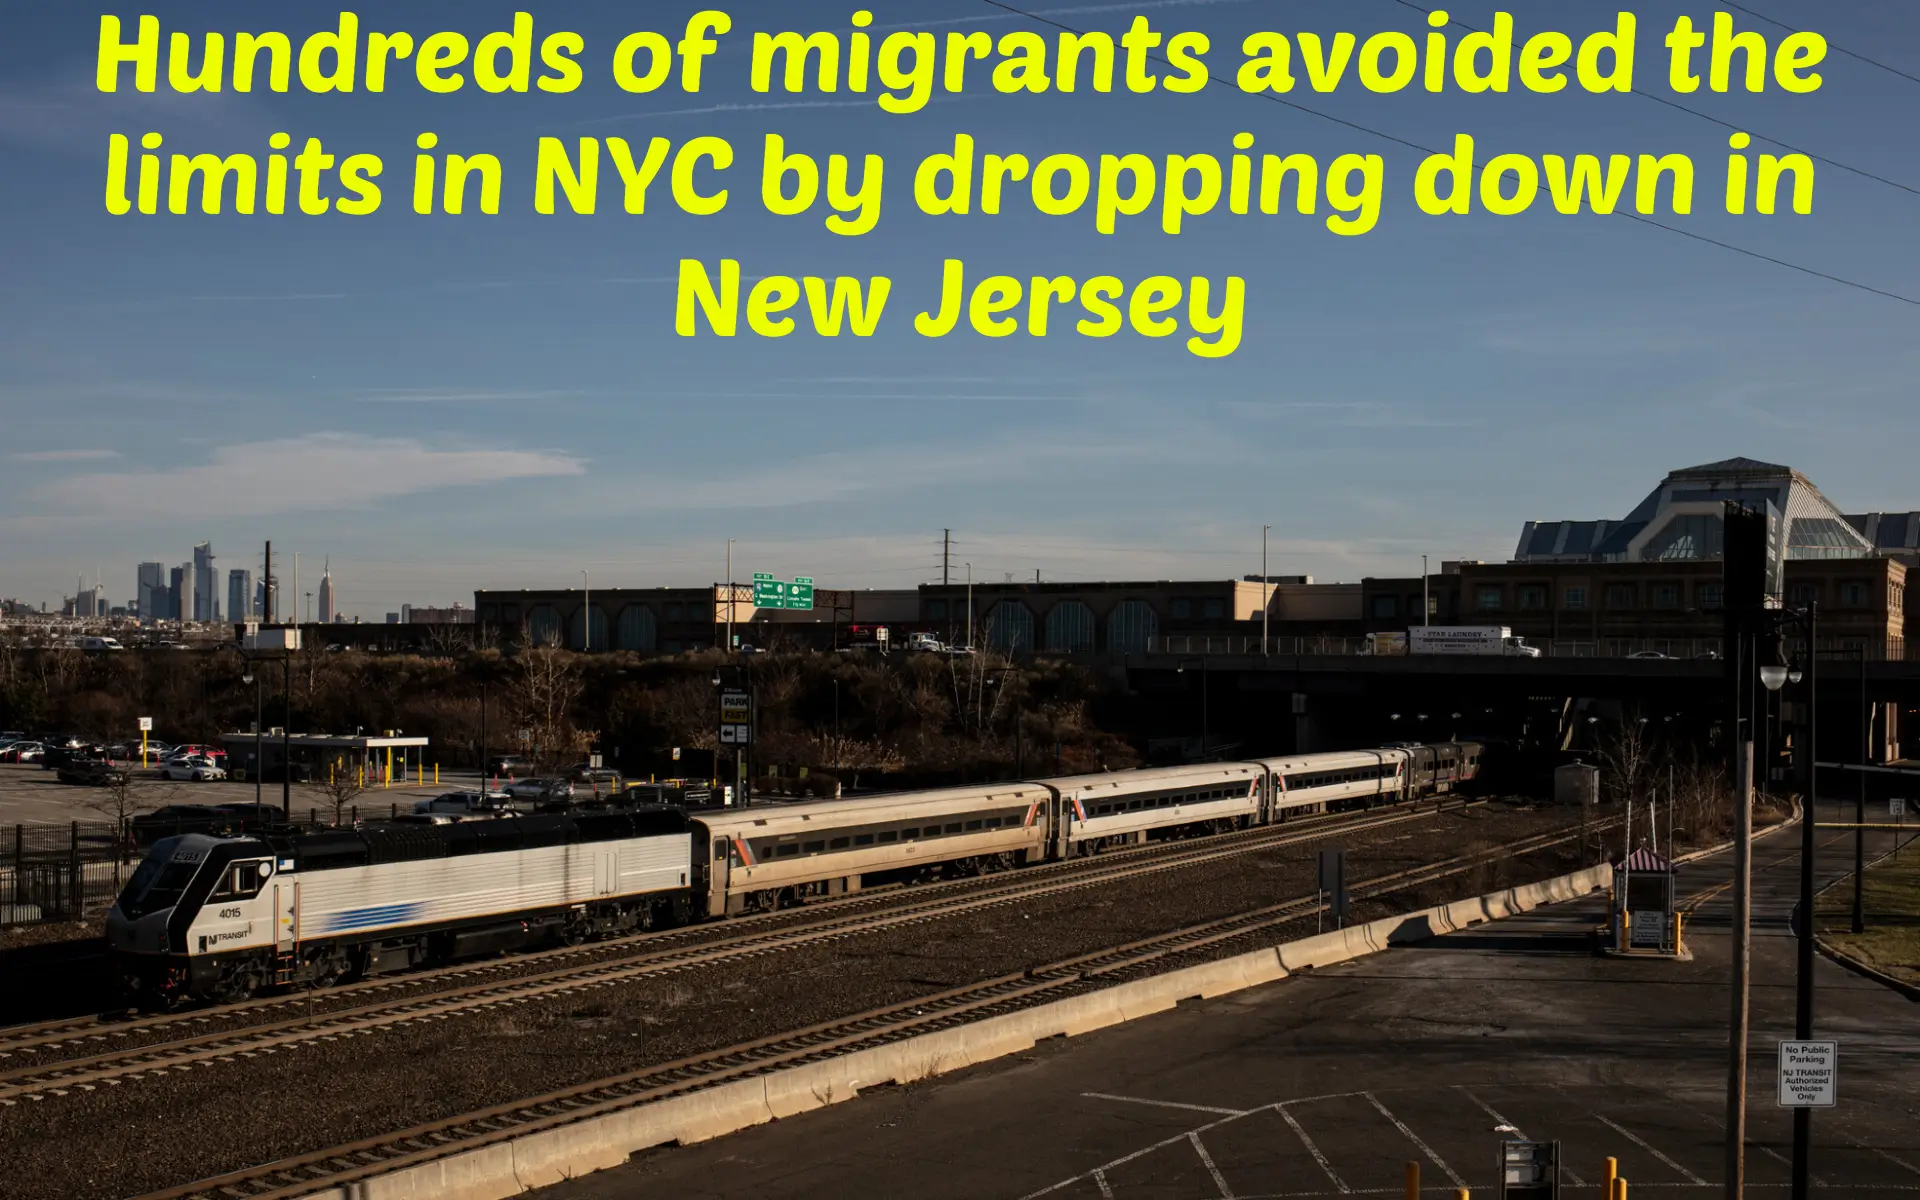 Hundreds of migrants avoided the limits in NYC by dropping down in New Jersey